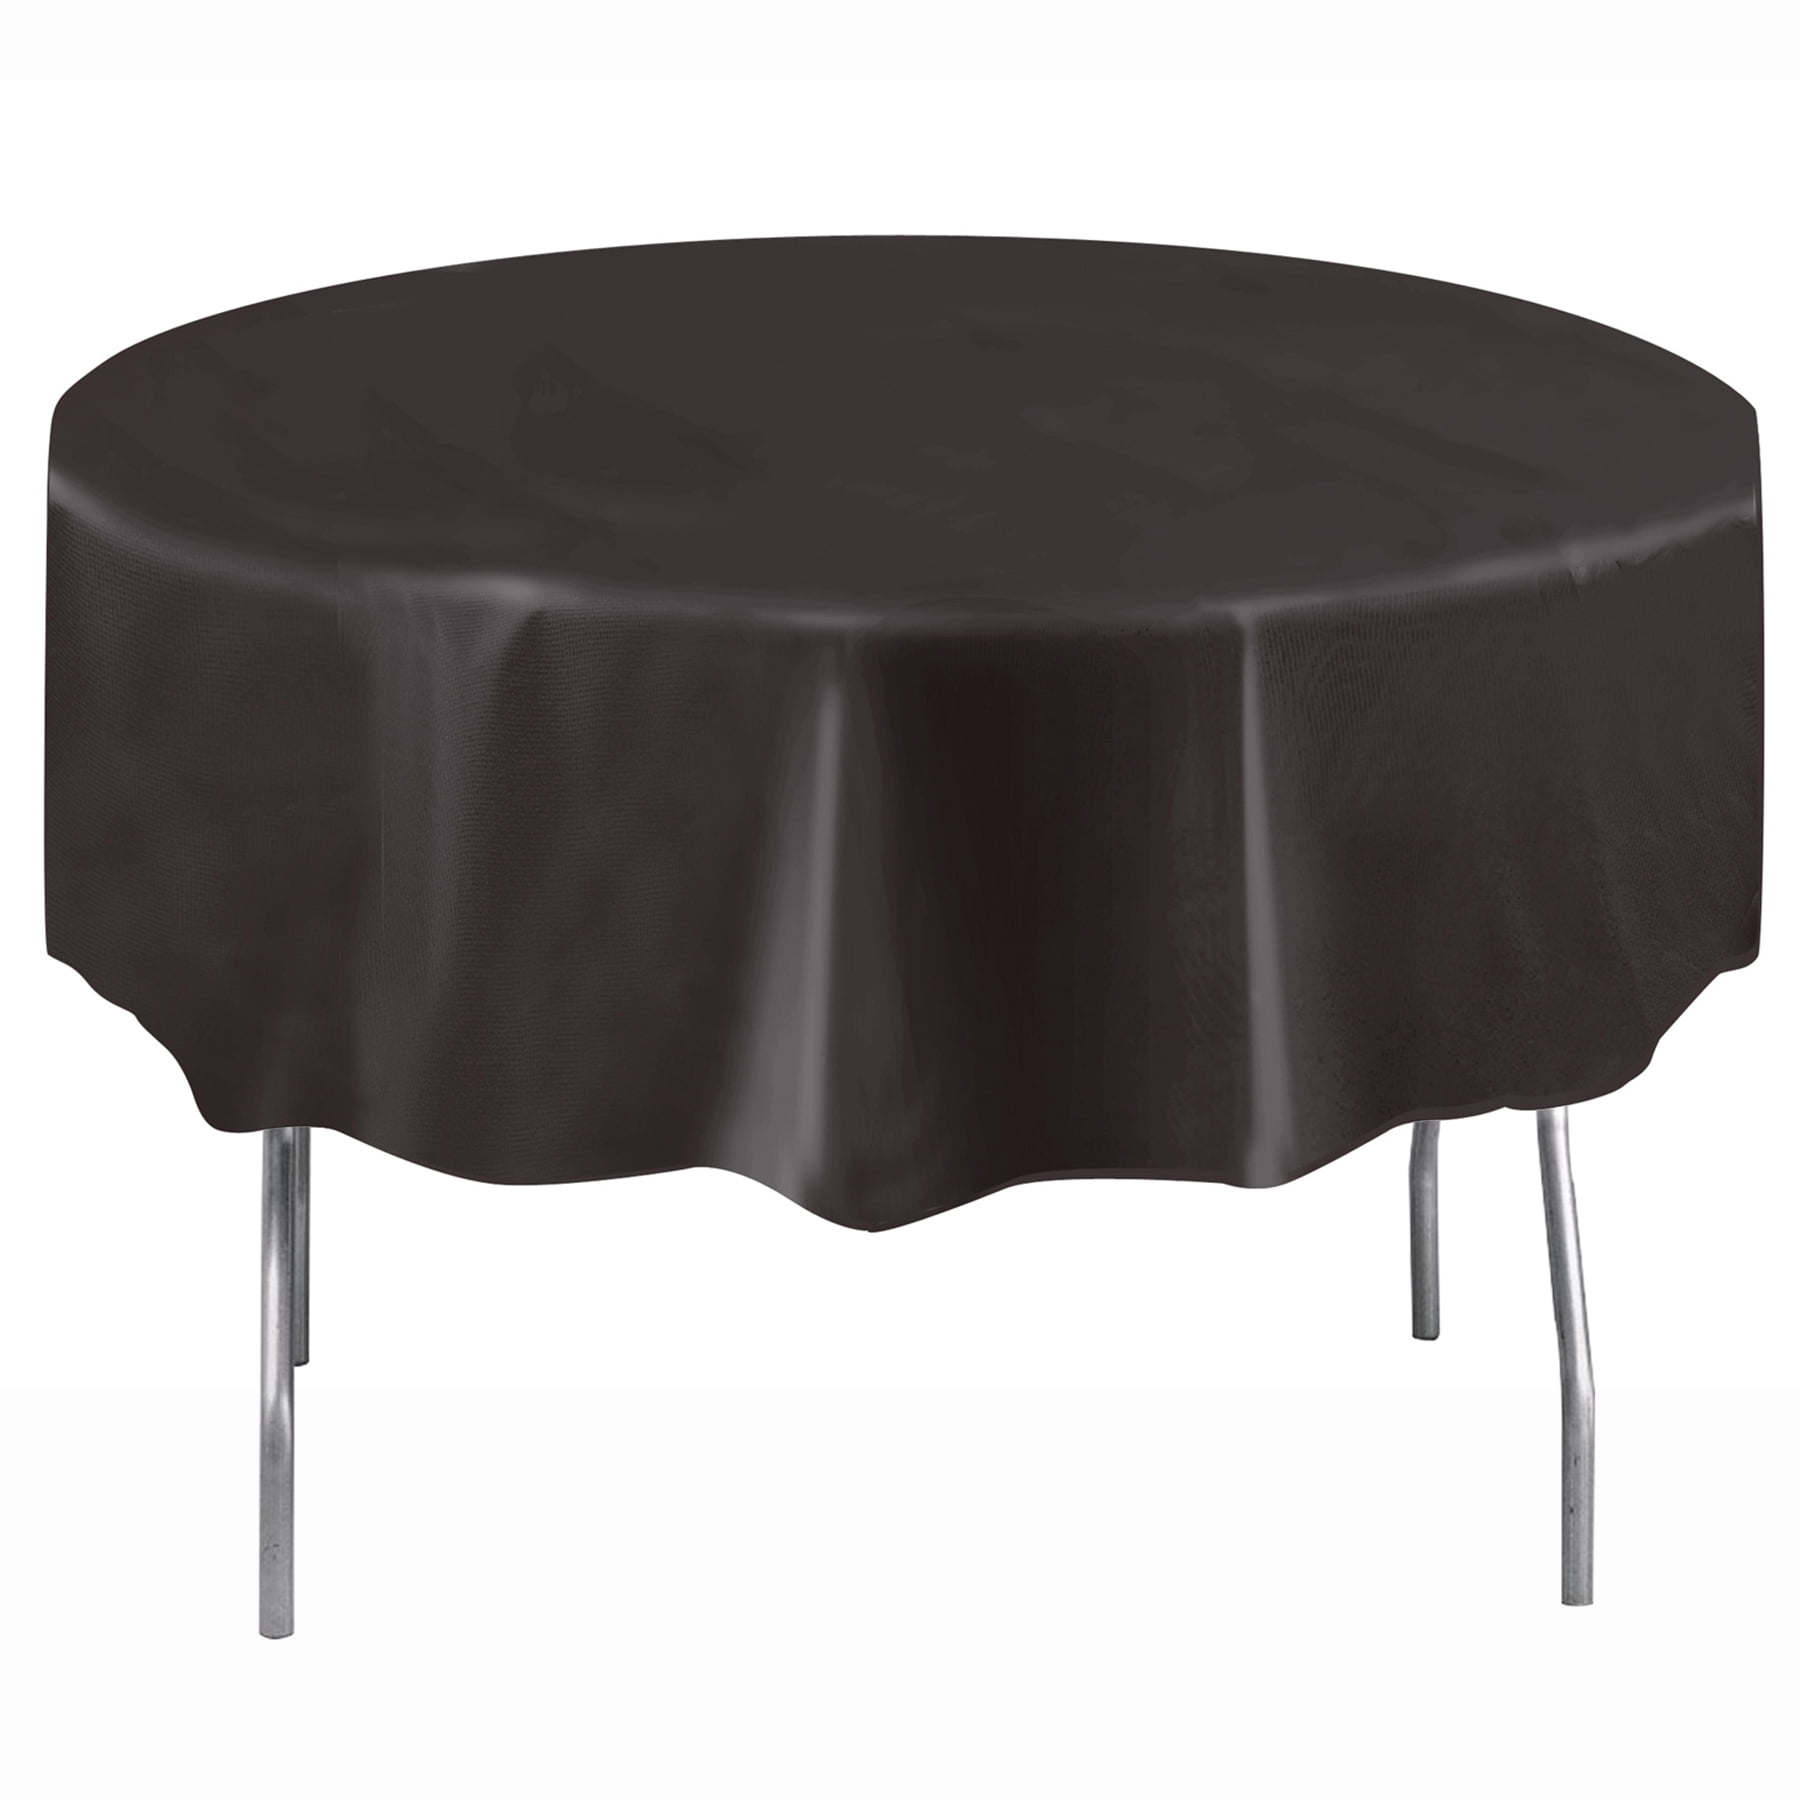 Black Plastic Round Tablecloths 84in, Black Plastic Round Tablecloths